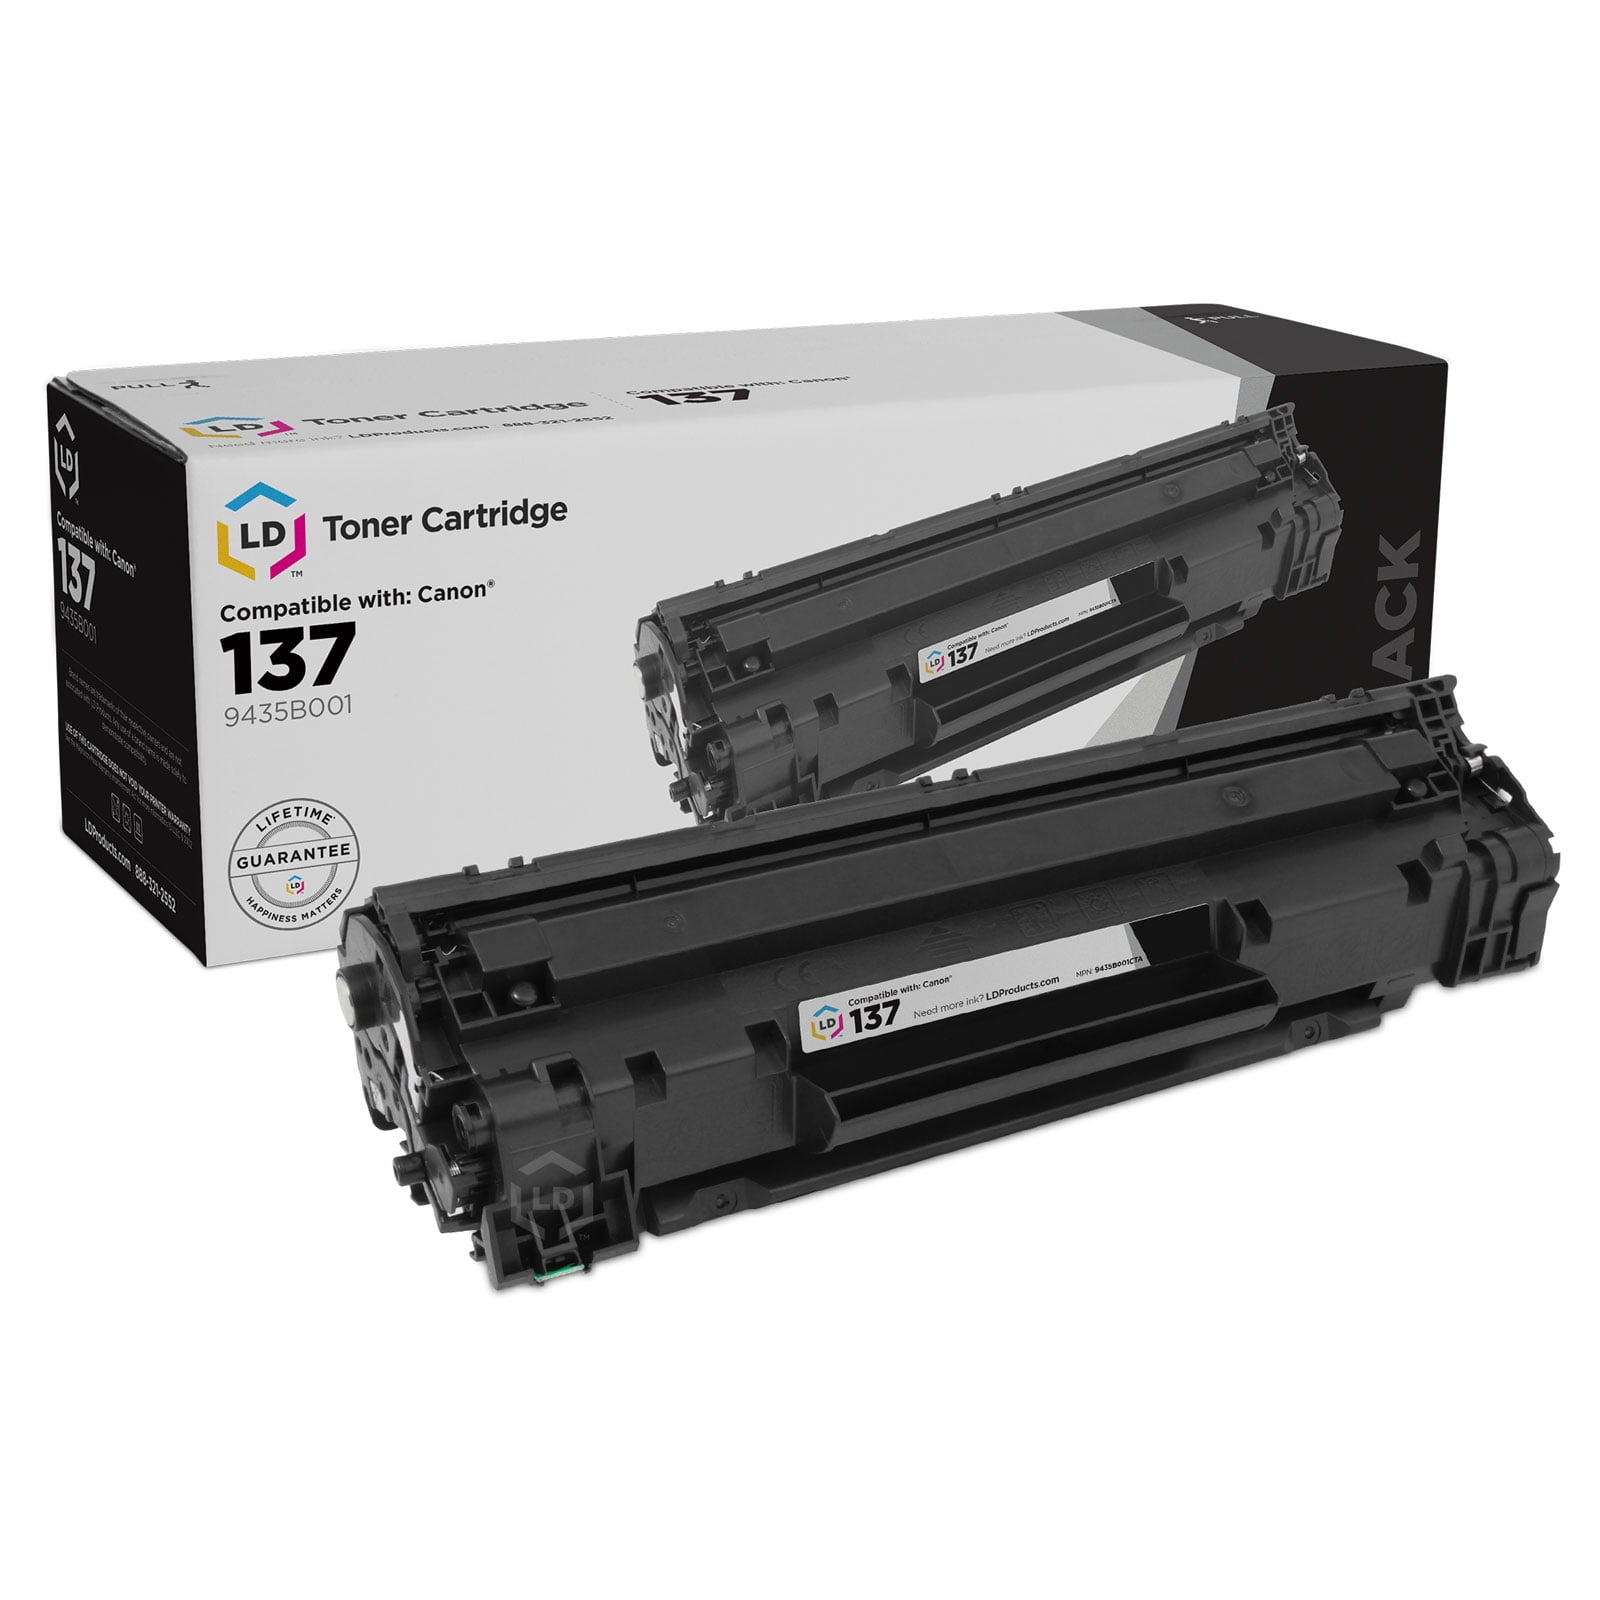 Valuetoner Compatible Toner Cartridge Replacement for Canon 137 9435B001AA to use with ImageClass D570 MF236n MF247dw LBP151dw MF227dw MF229dw MF216n MF232W MF217w LBP151dw MF249dw Black, 4-Pack